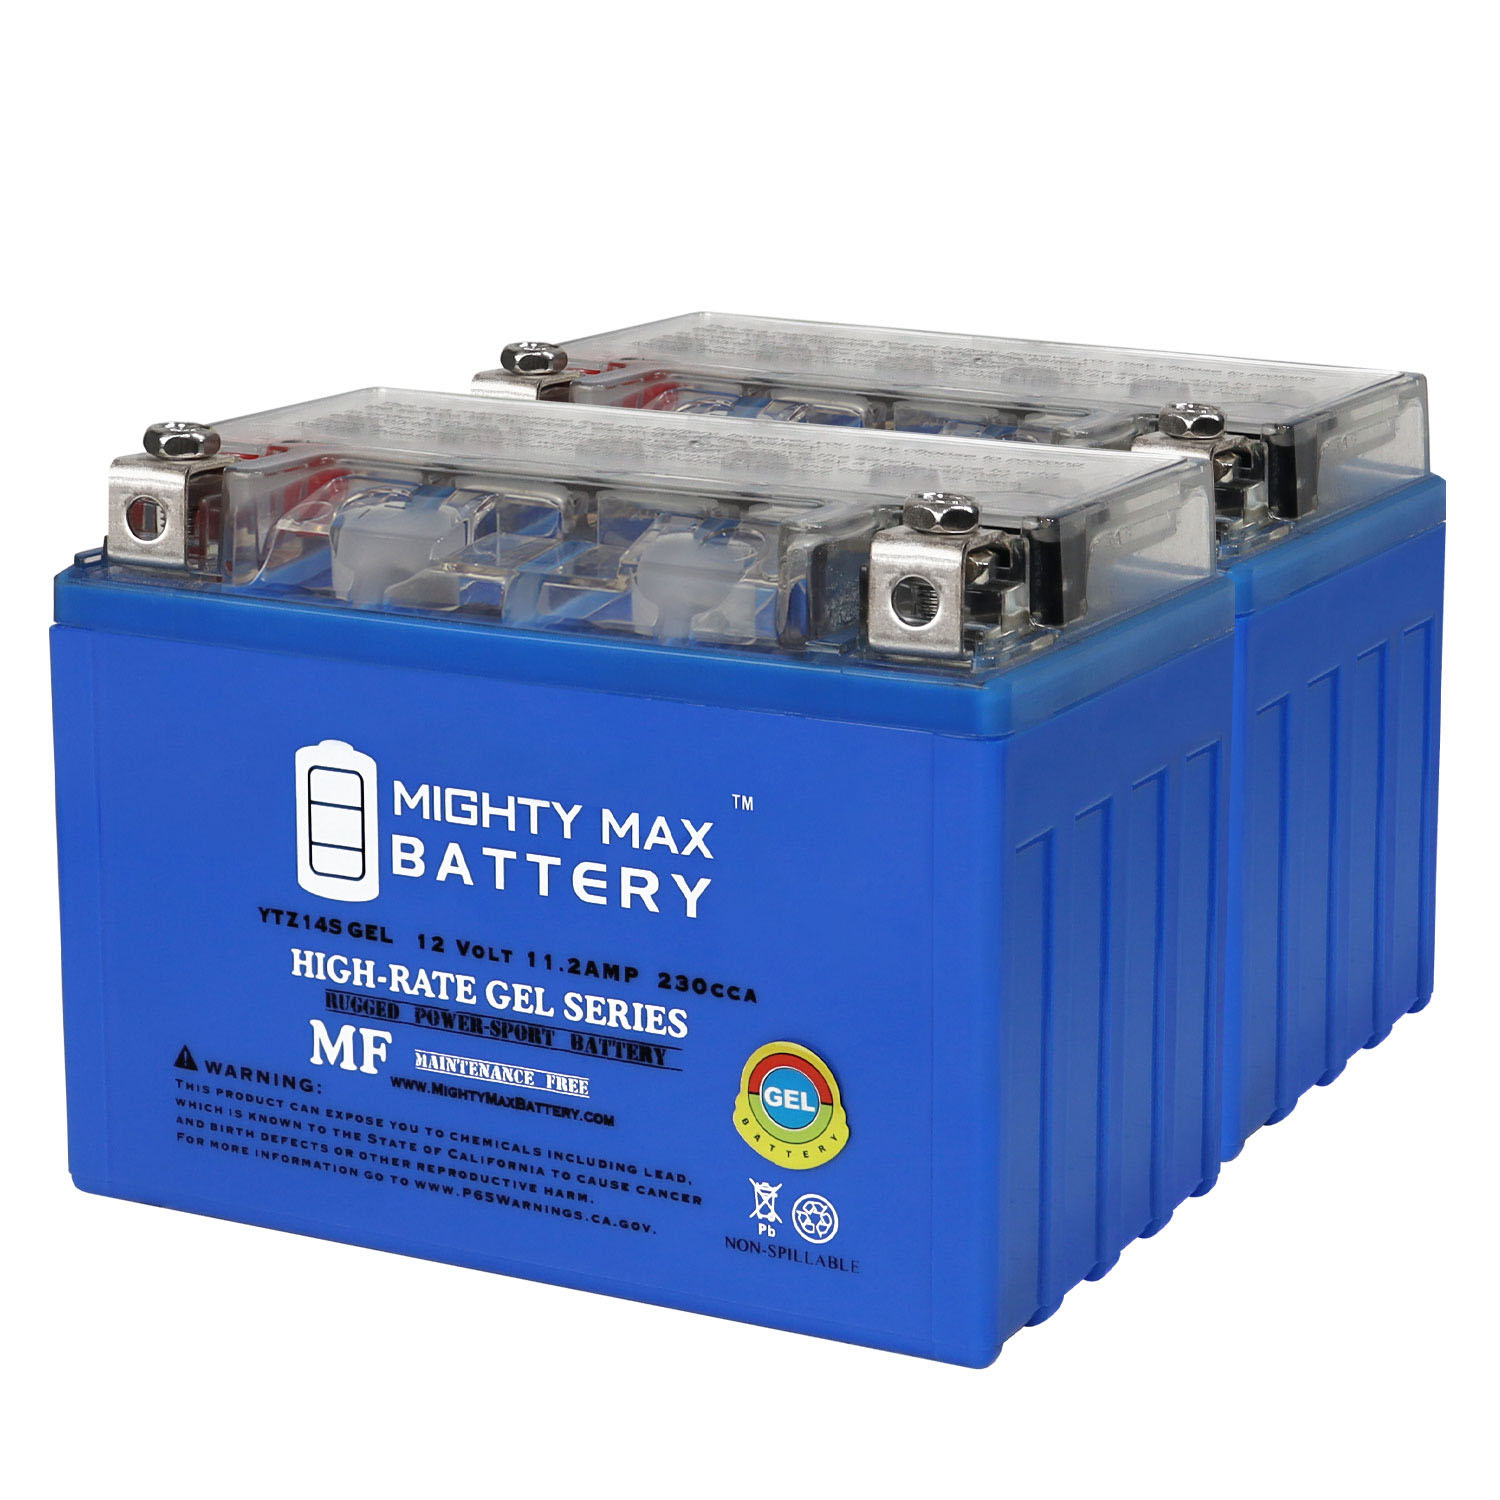 Mighty Max YTZ14SGEL 12V 11.2AH compatible with Power-Sonic PTZ14S 